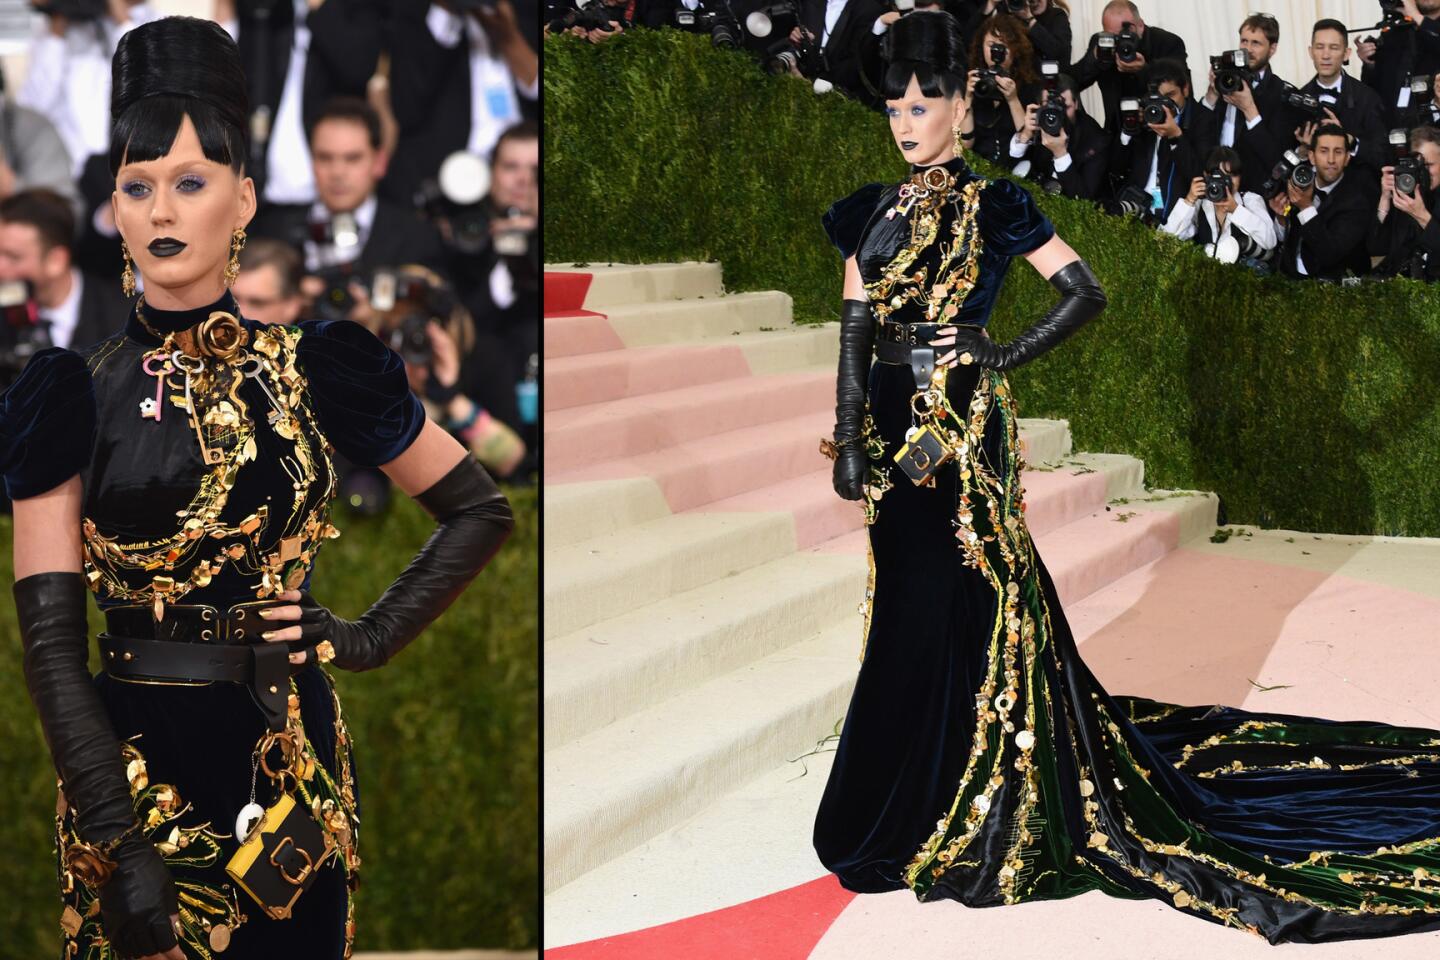 Met Gala 2016 fashion: silver, feathered, and a lot like the early 2000s